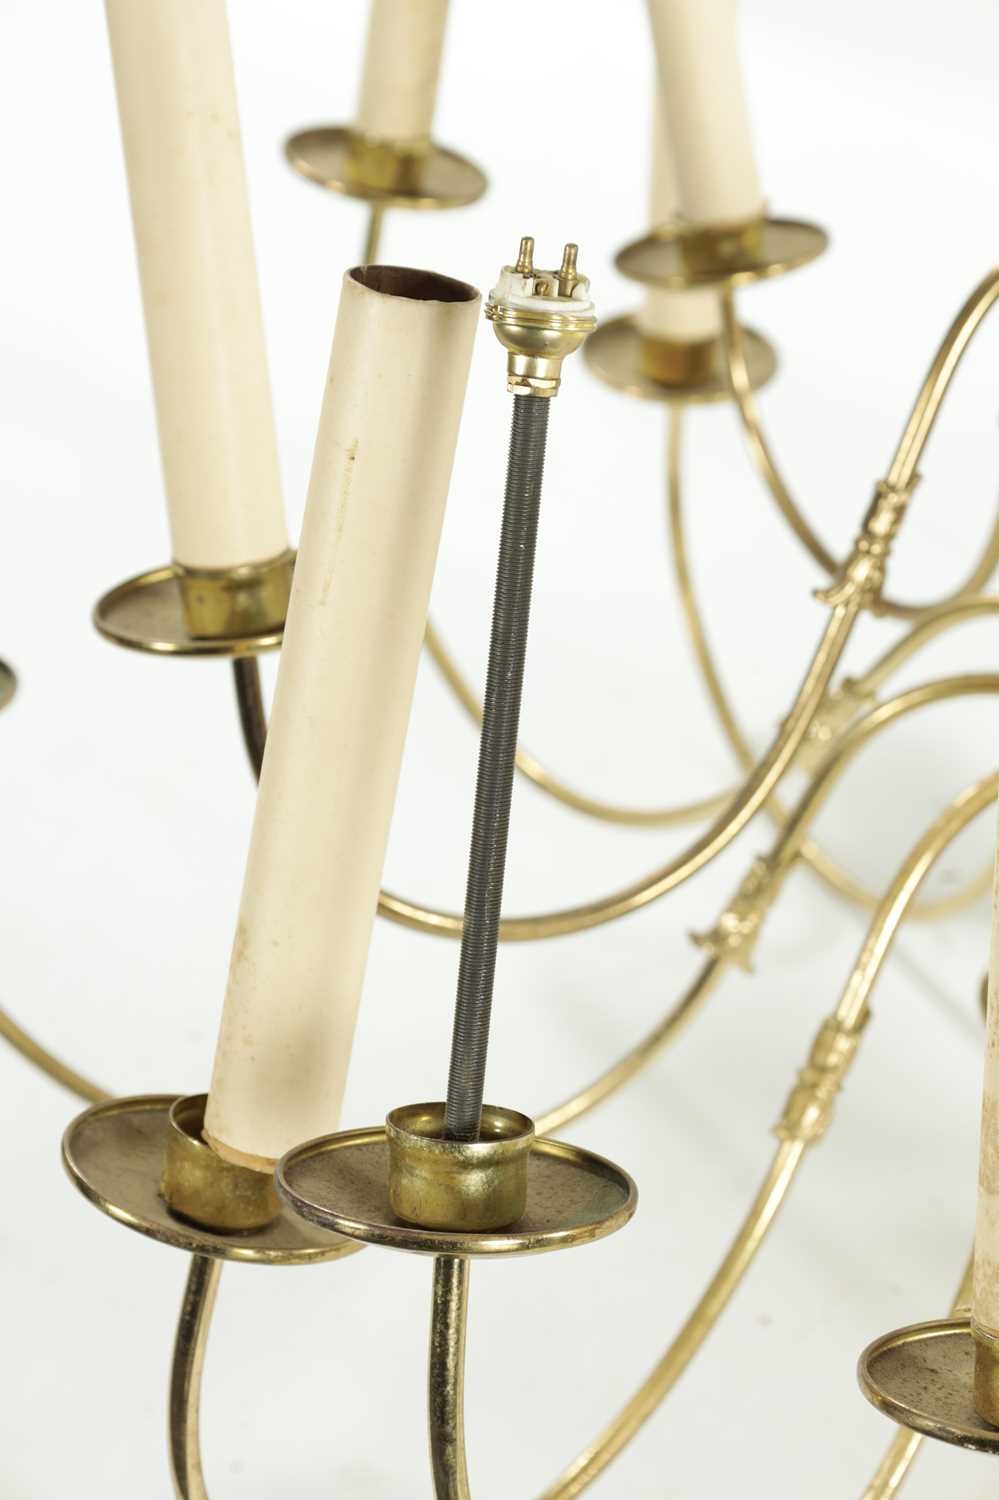 A LARGE 20TH CENTURY BRASS HANGING LIGHT - Image 4 of 7